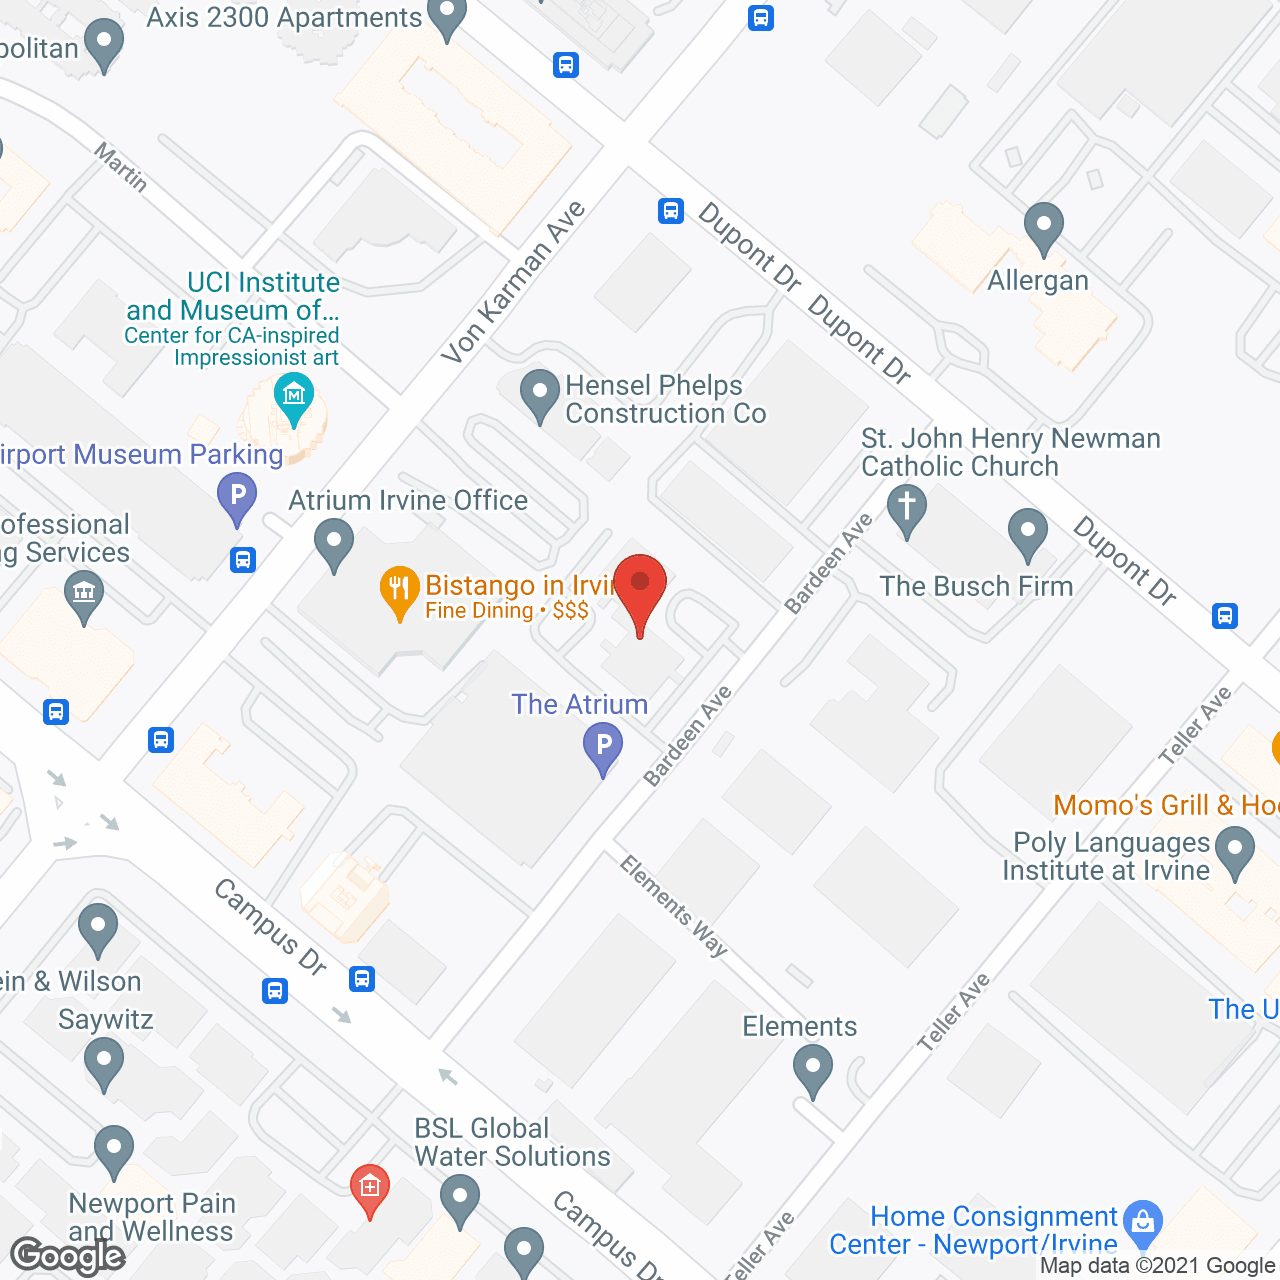 Golden Age Companions in google map